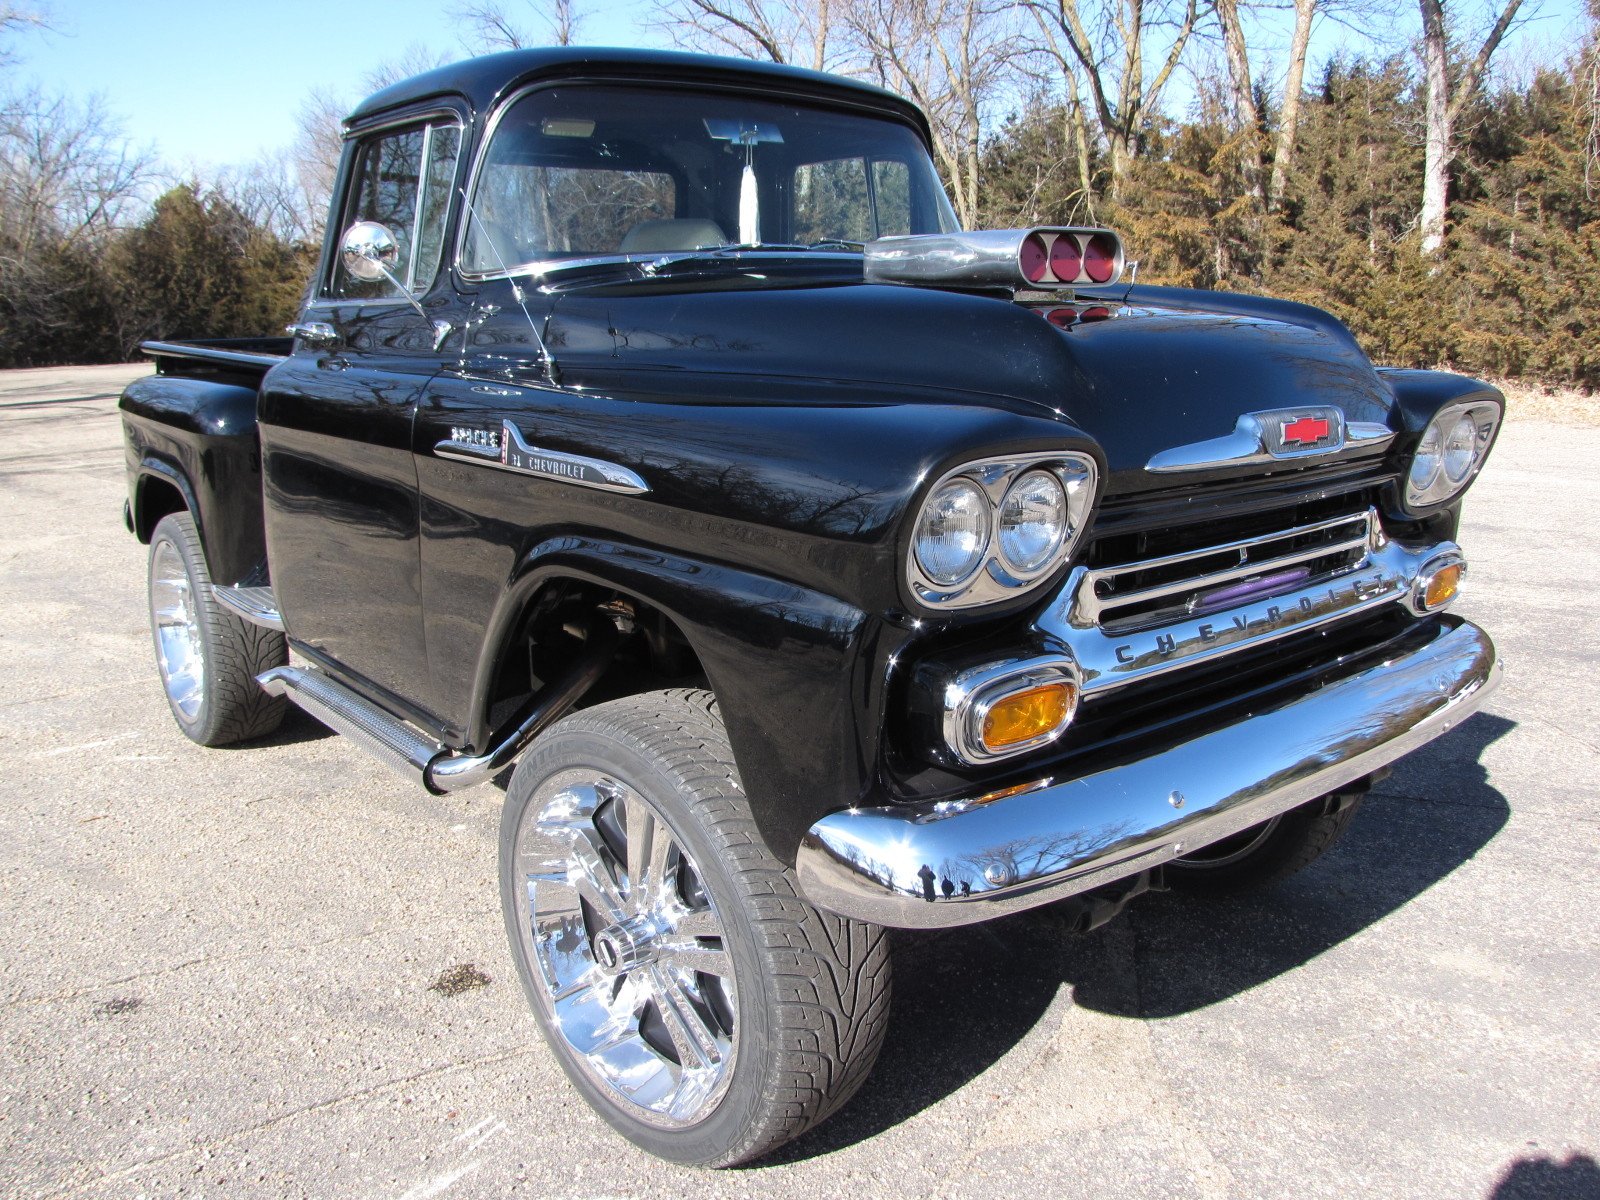 Amazing Chevrolet Apache Pictures & Backgrounds